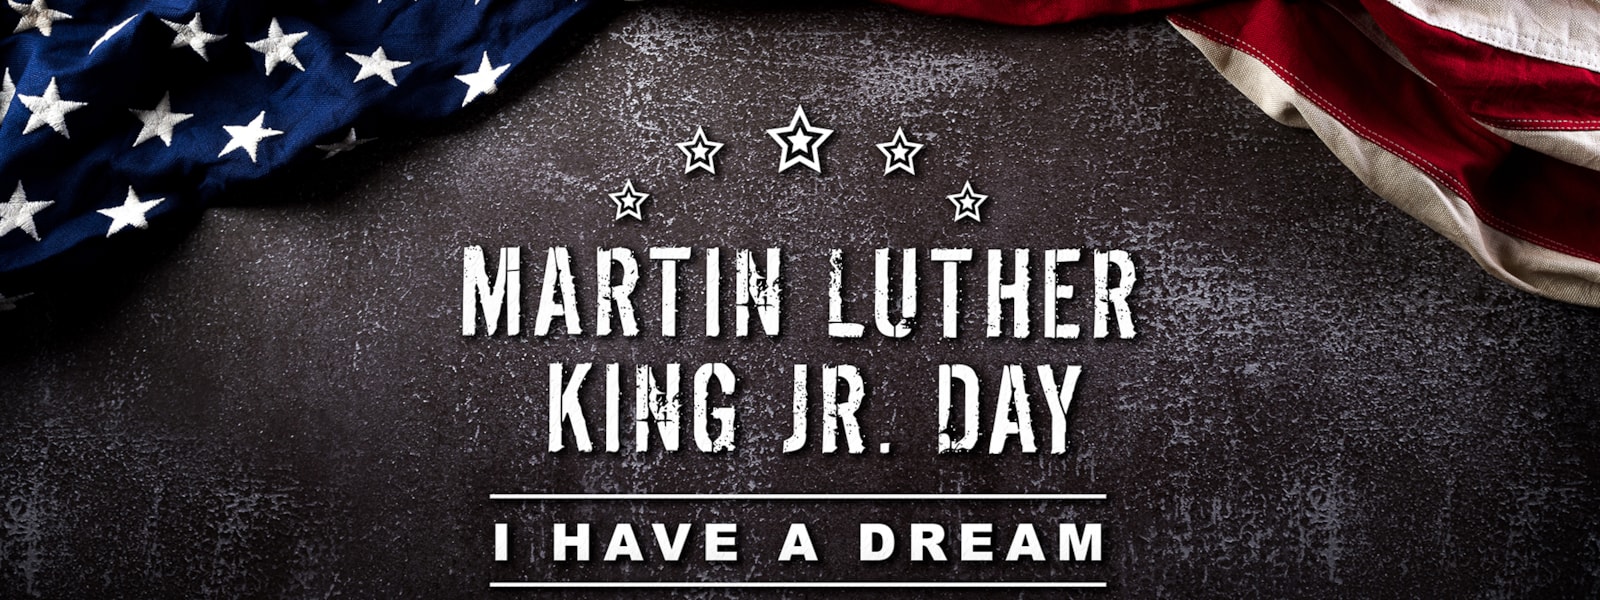 Martin Luther King Jr Day with American flag